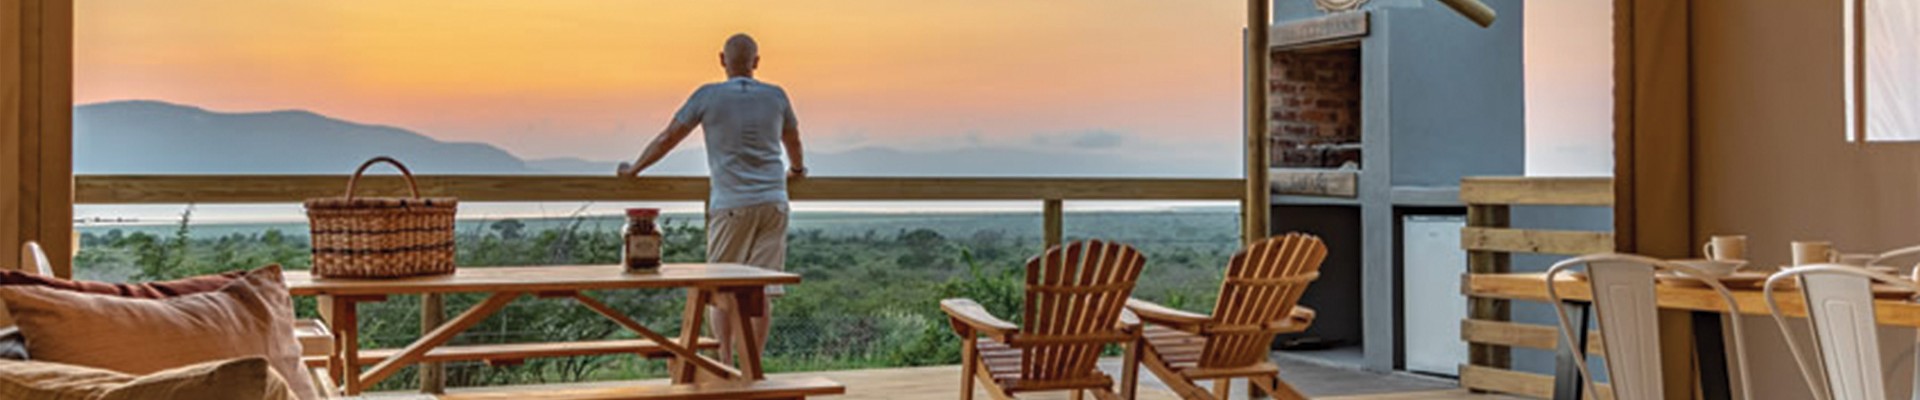 AfriCamps at White Elephant Safaris - Pongola Game Reserve Package (2 Nights)